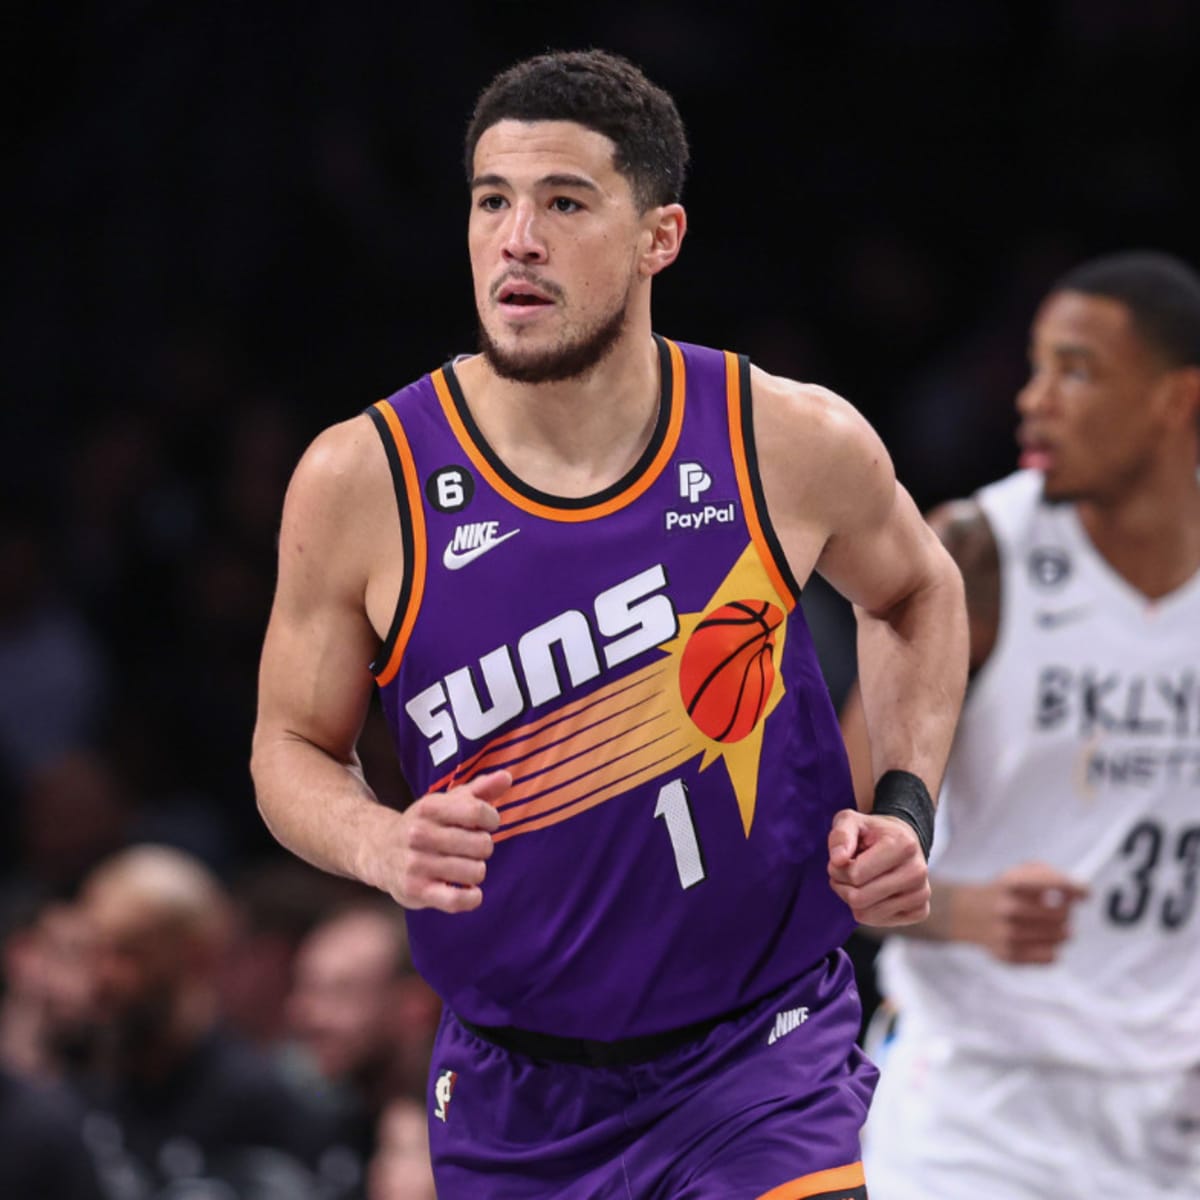 Devin Booker gets back into rhythm in the Suns' smashing win vs